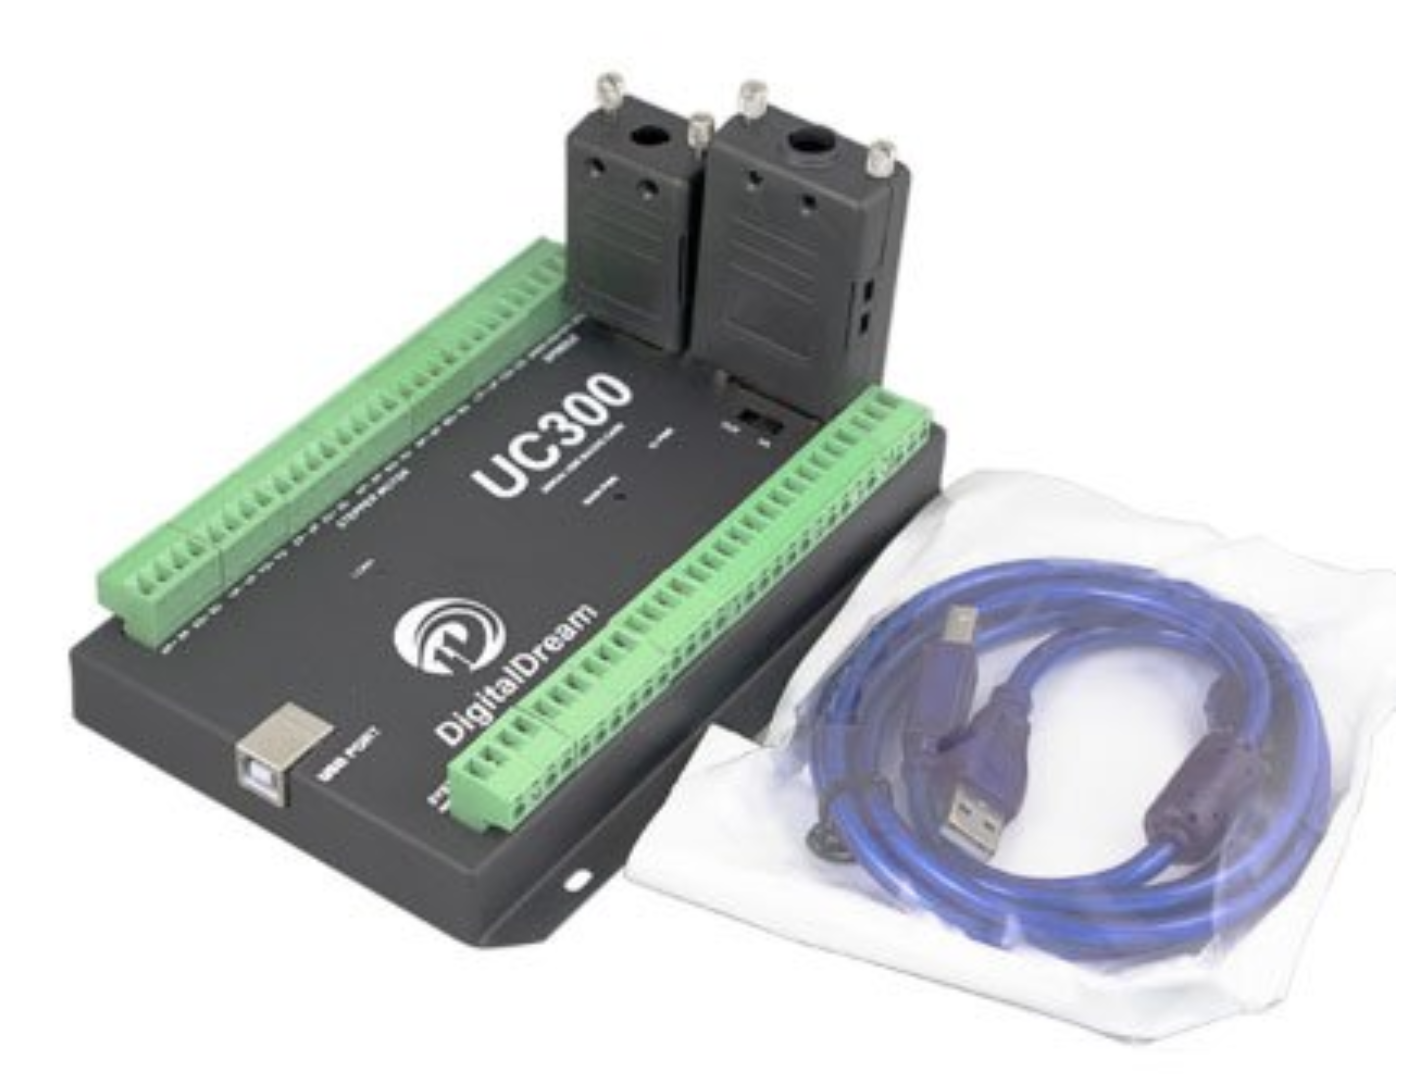 UC300 Motion Controller